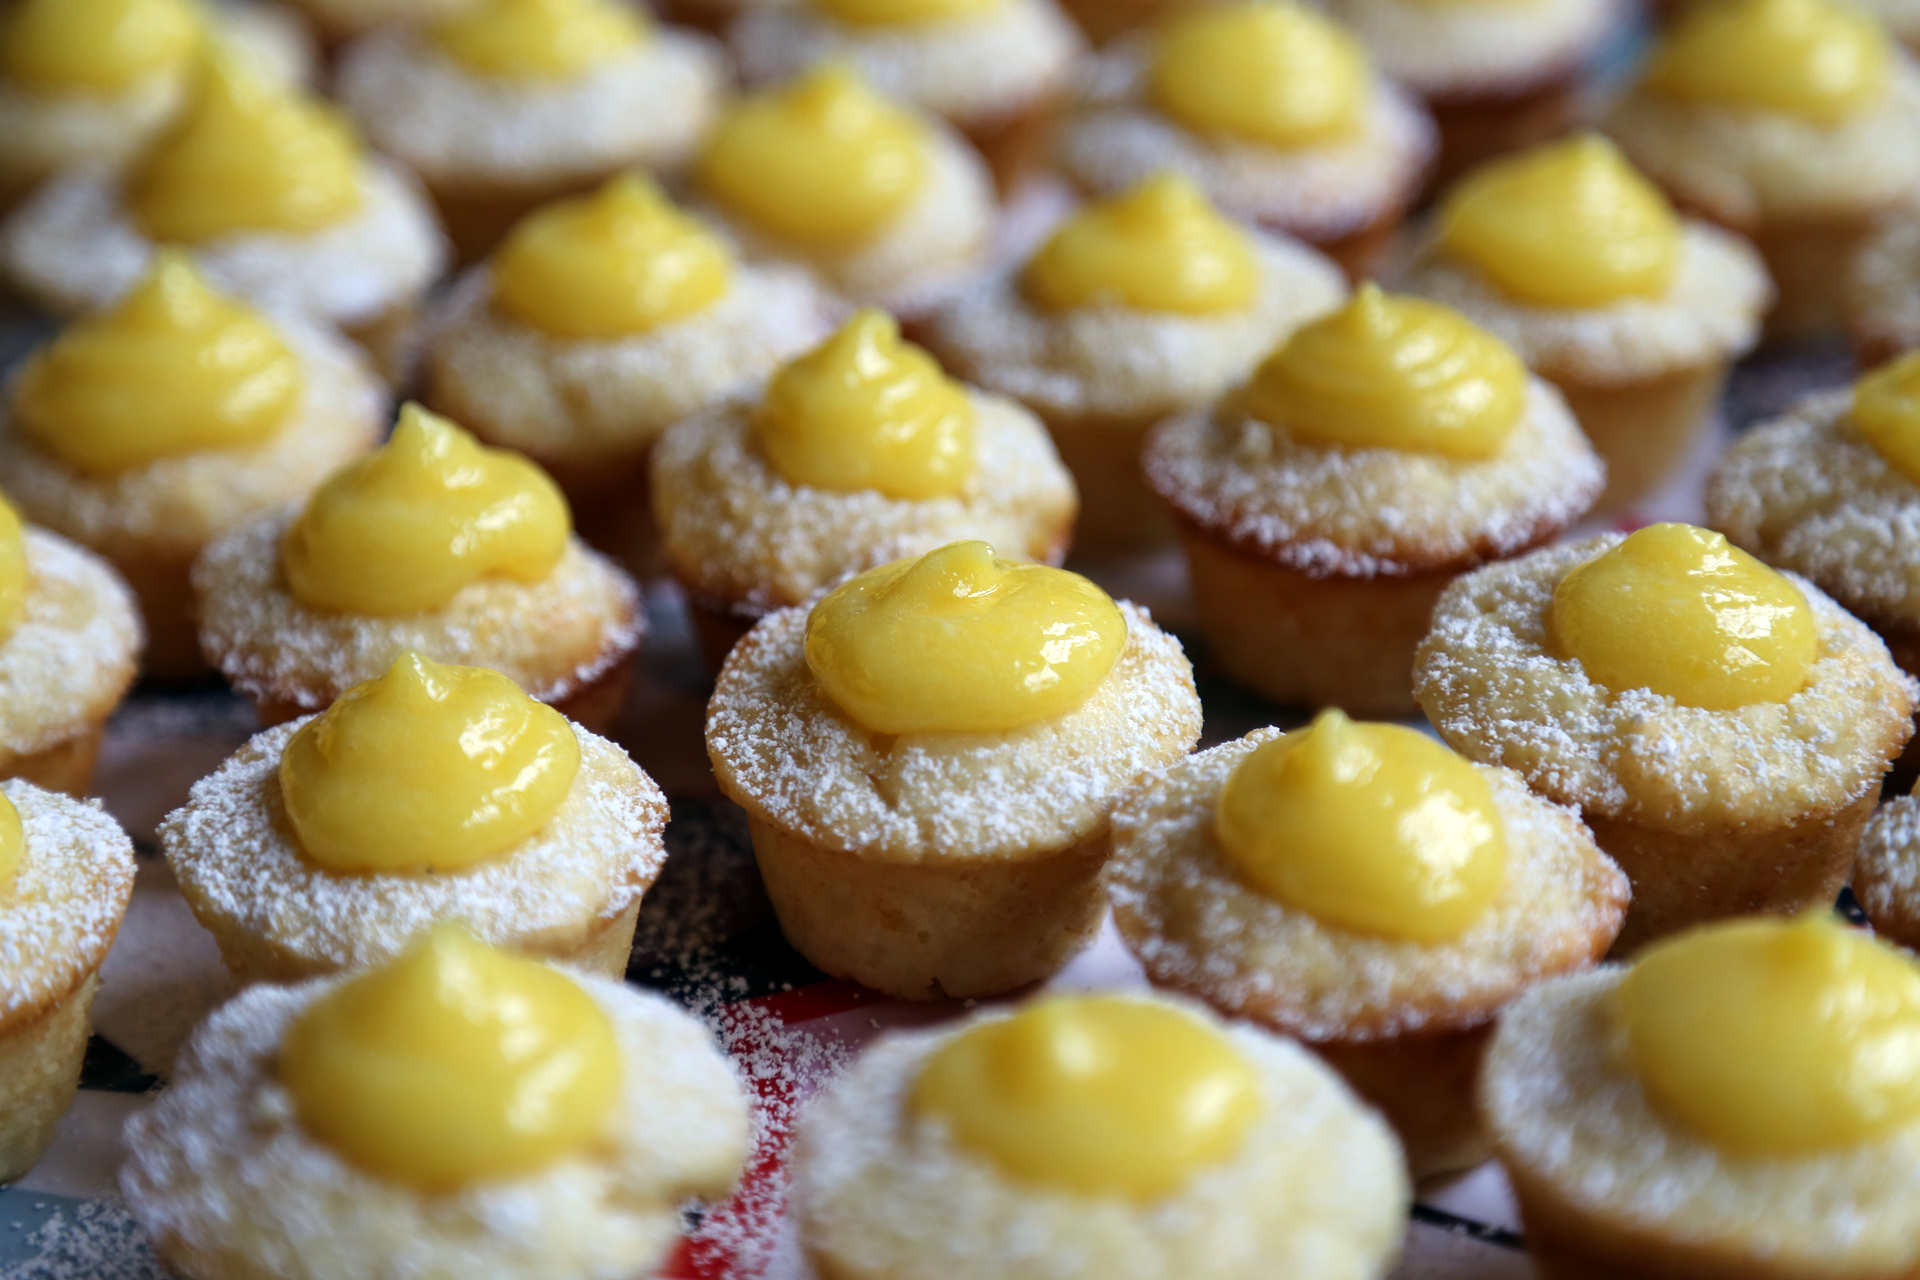 Serve the Mini Meyer Lemon Curd Cupcakes at once.